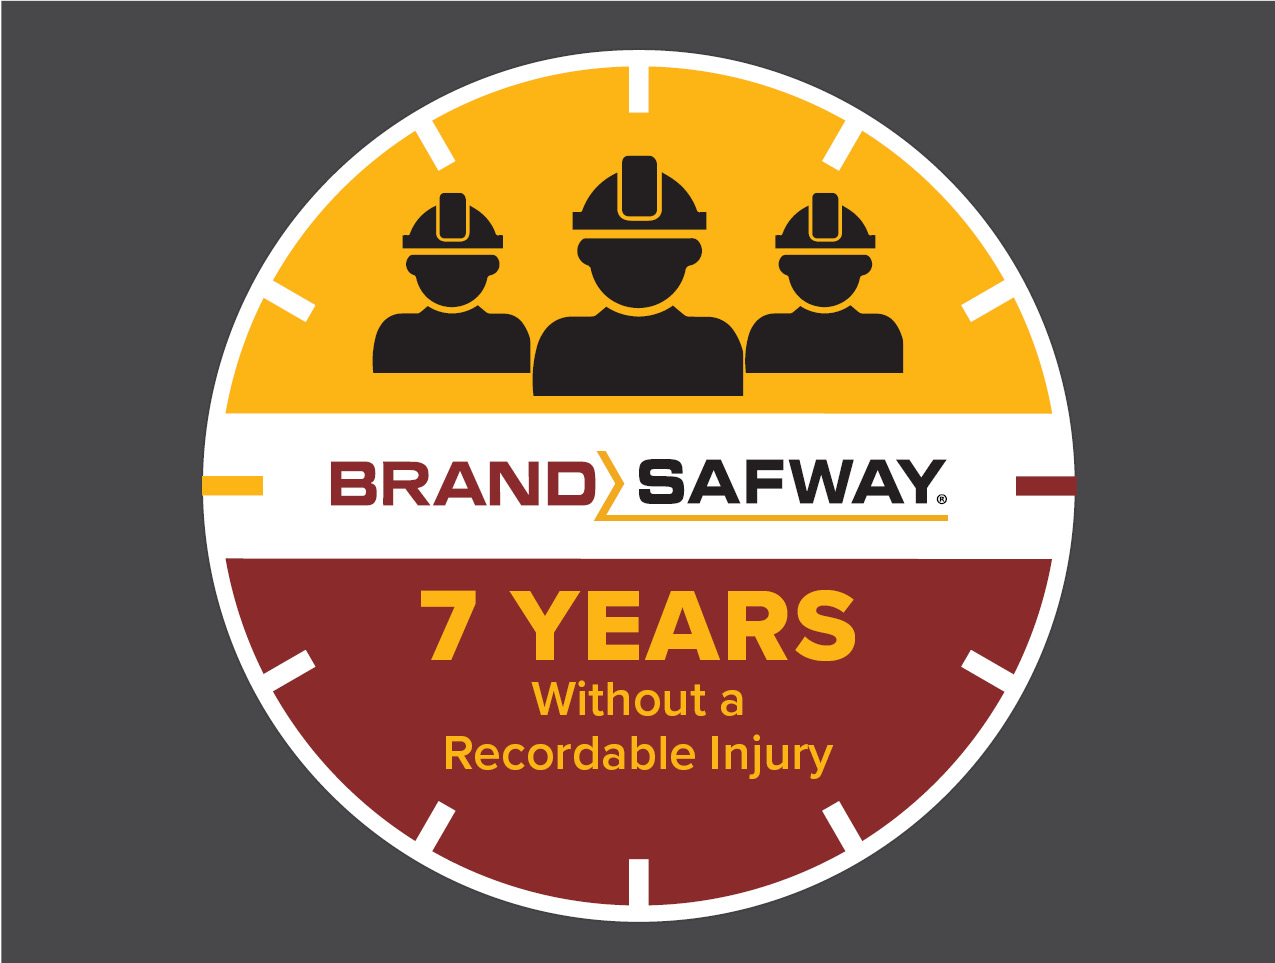 BrandSafway crews working at Kraton Corporation worked more than seven years and 642,767 hours without a recordable injury.